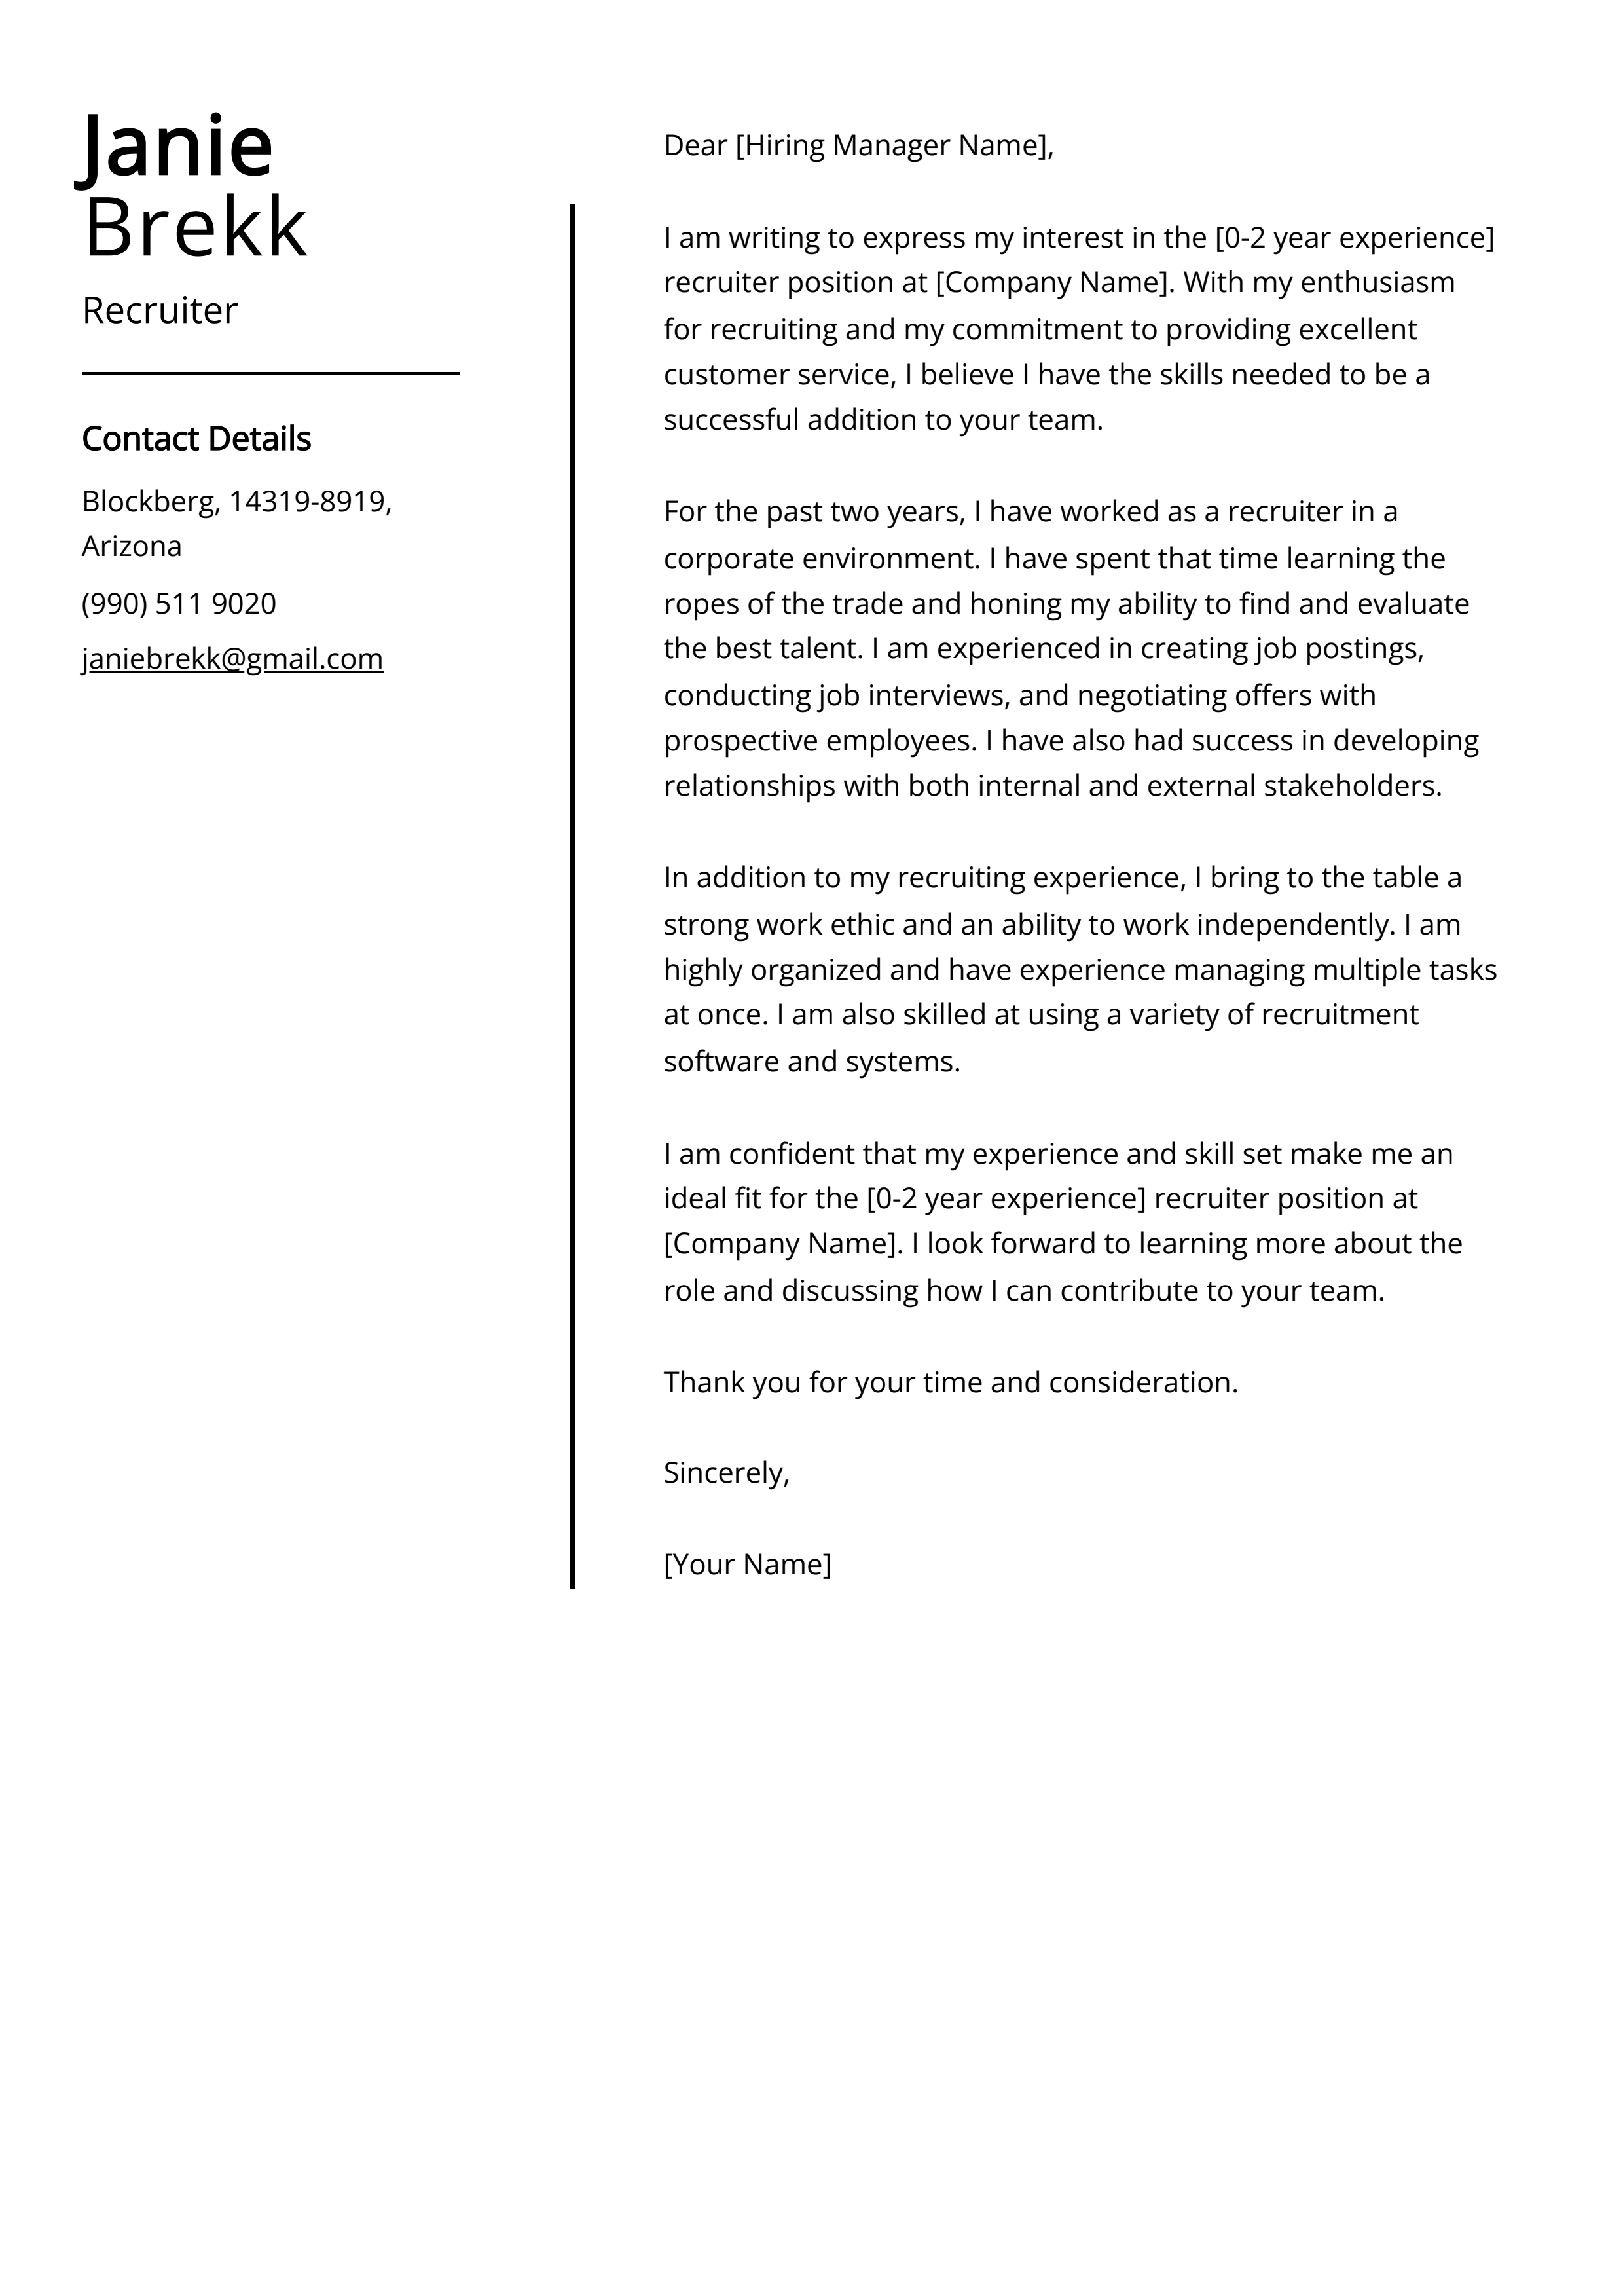 Experienced Recruiter Cover Letter Example